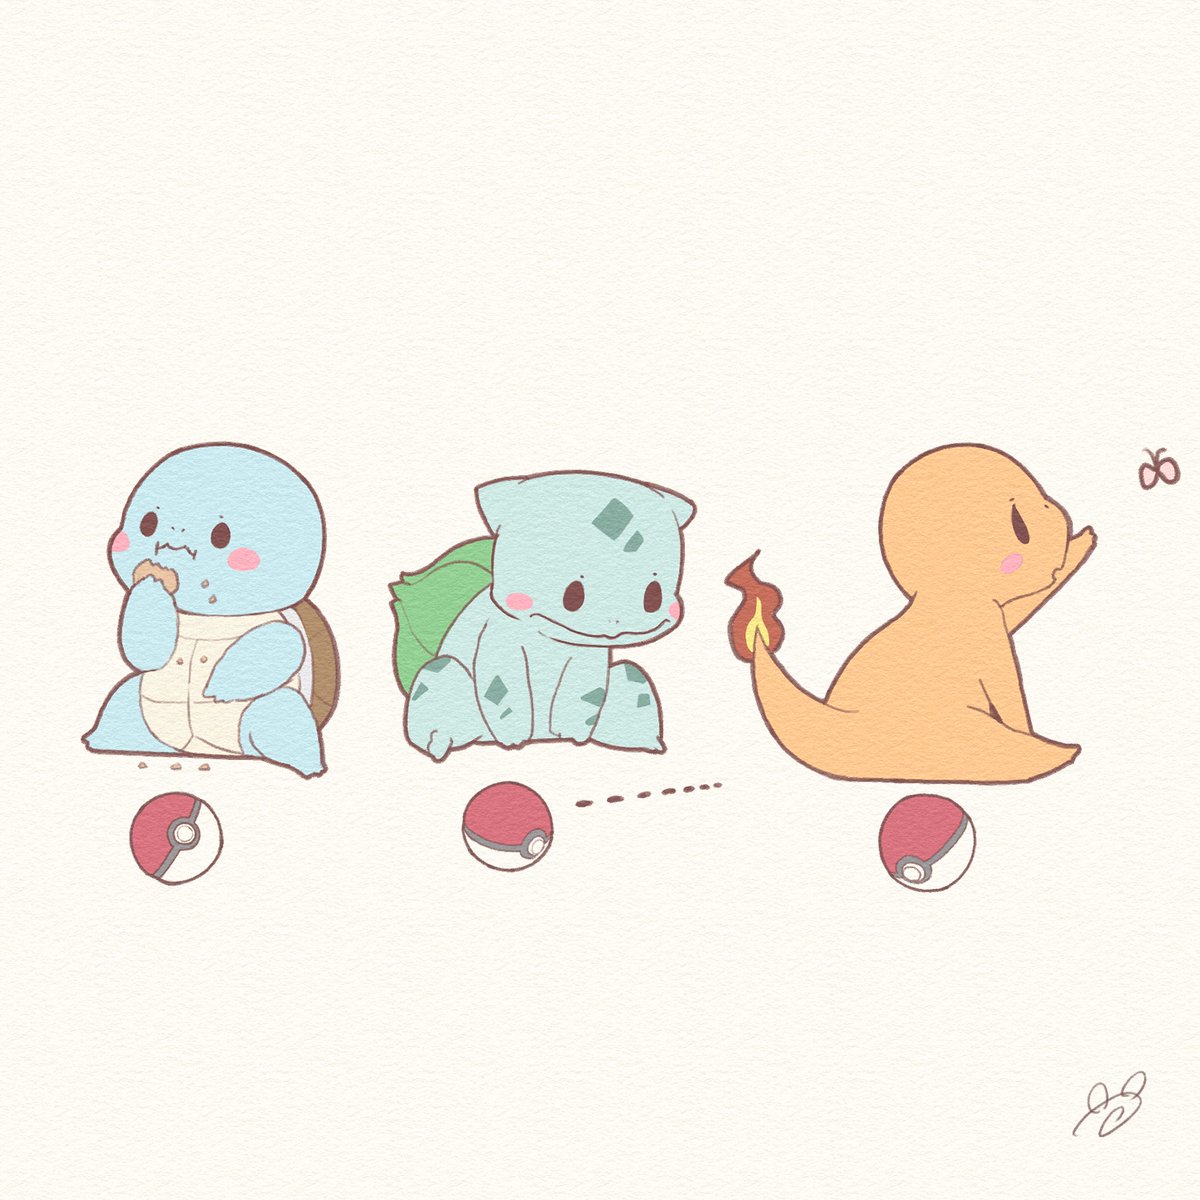 bulbasaur ,charmander ,squirtle no humans flame-tipped tail pokemon (creature) poke ball eating sitting fire  illustration images